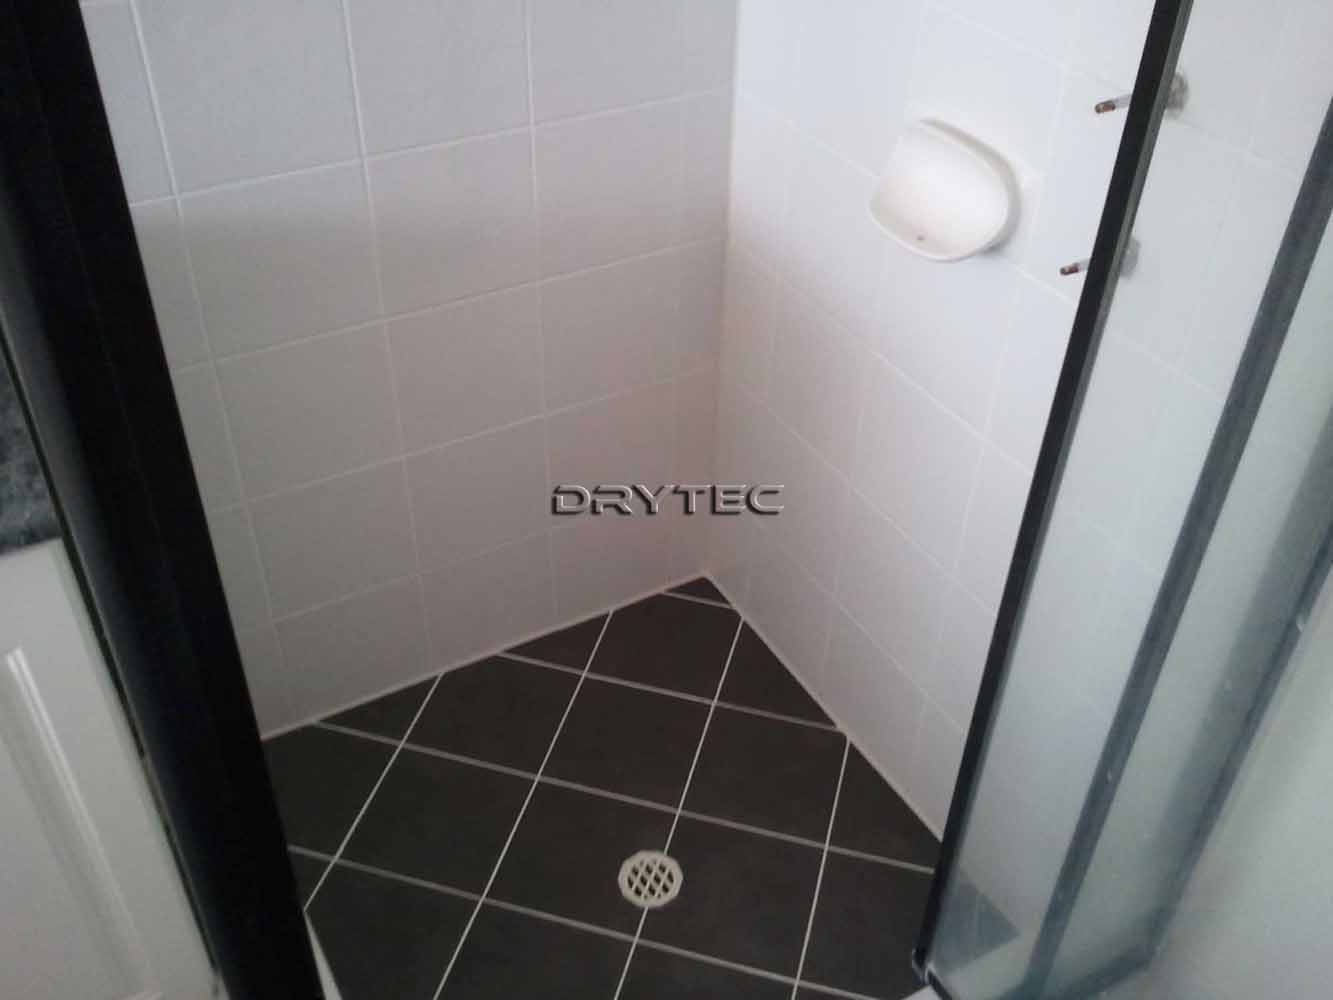 Leaking Shower Repairs and Regrouting Services in Perth WA